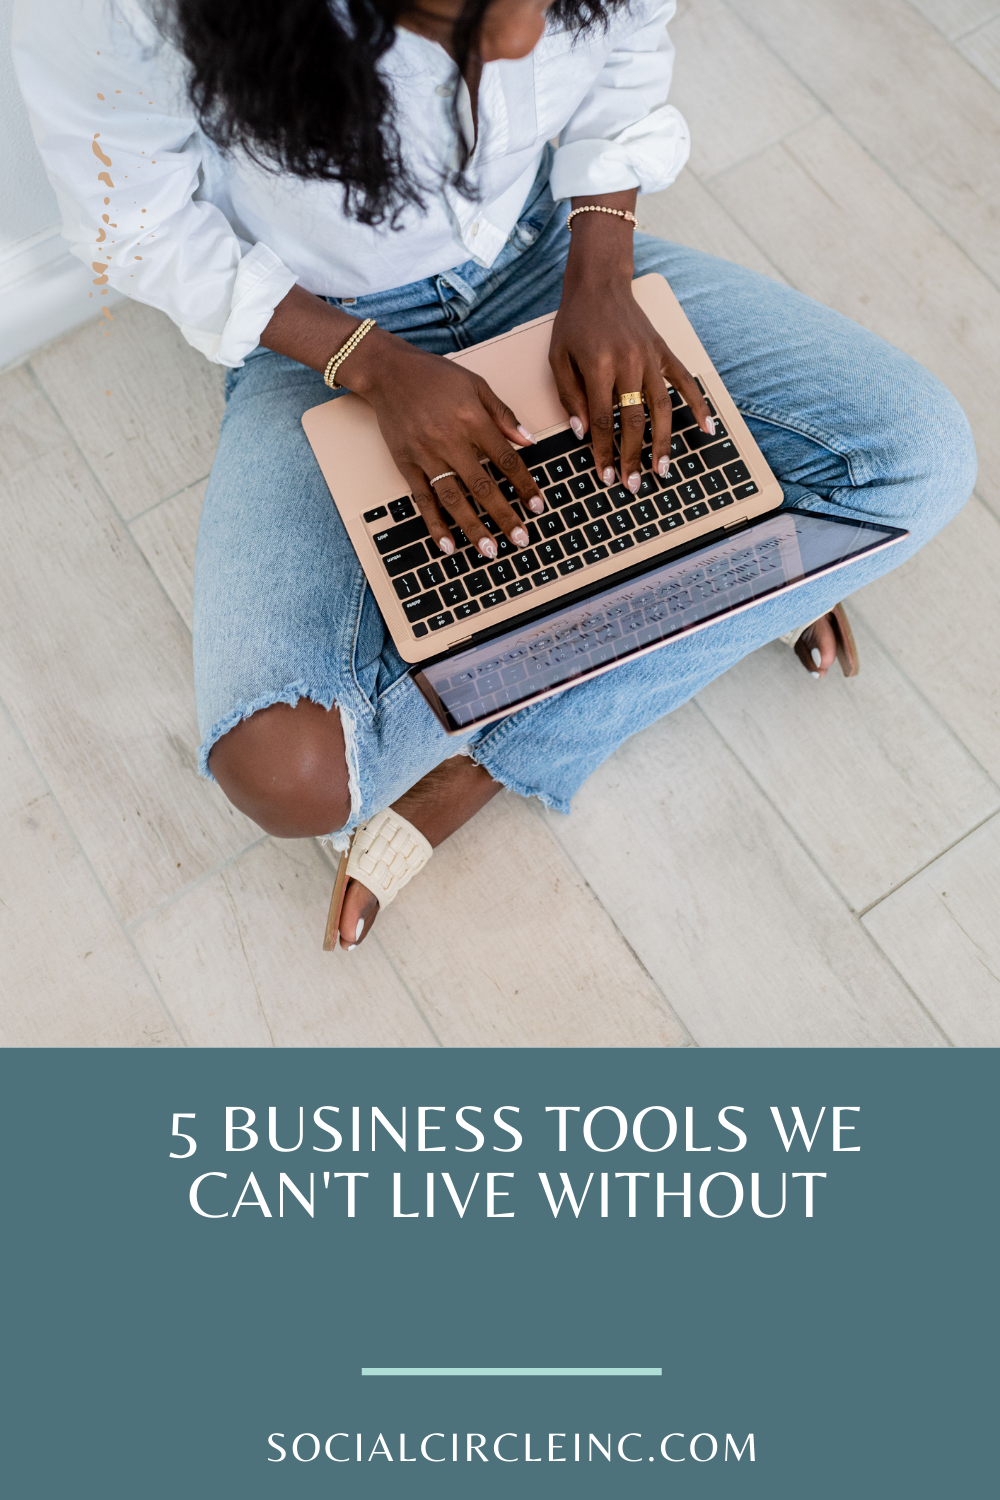 5 Business Tools We Can't Live Without (and the amazing founders behind them) 1